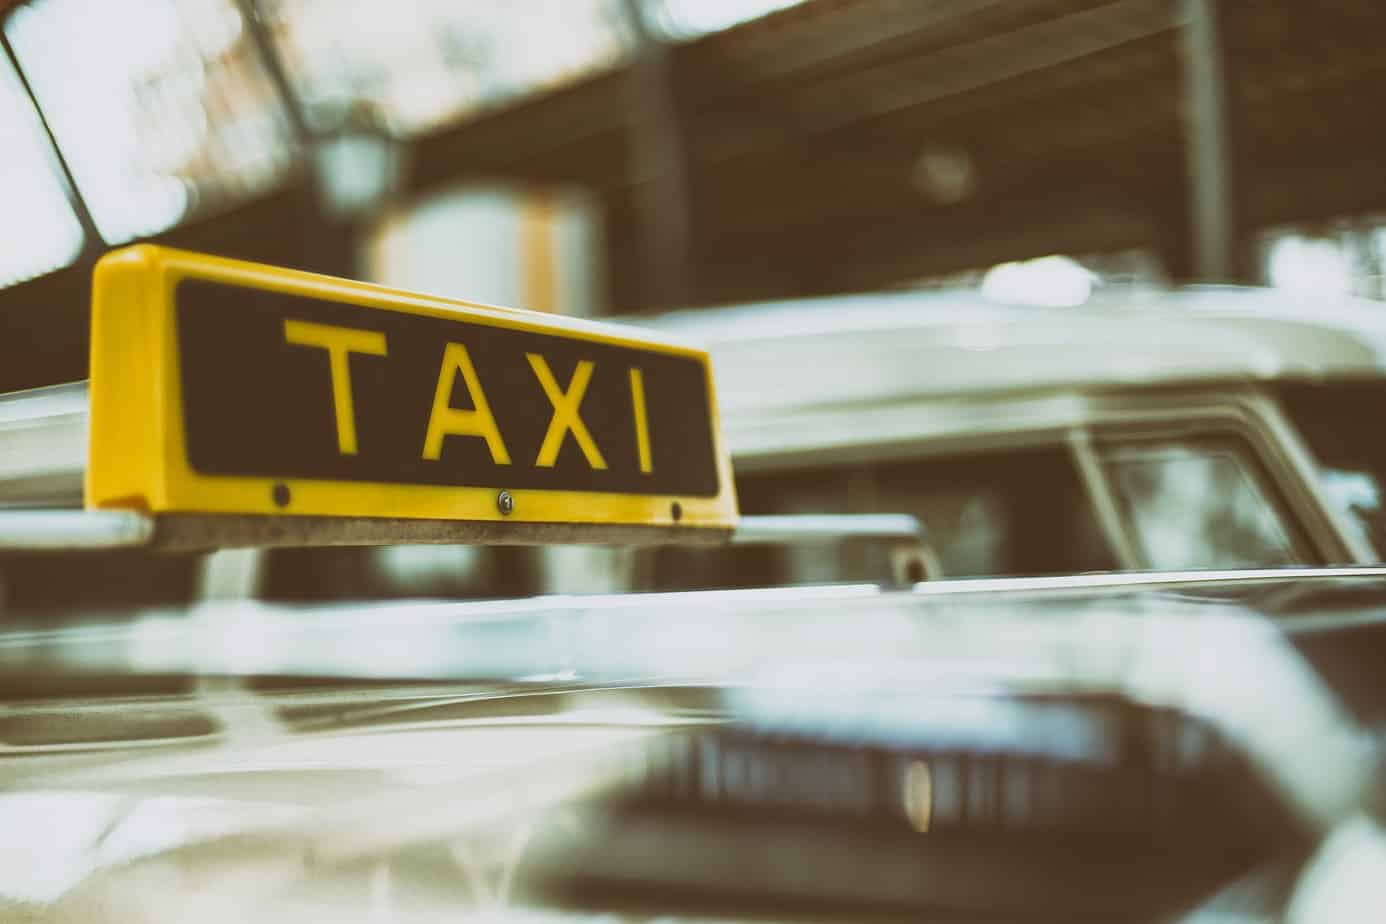 The Overpriced Taxis 